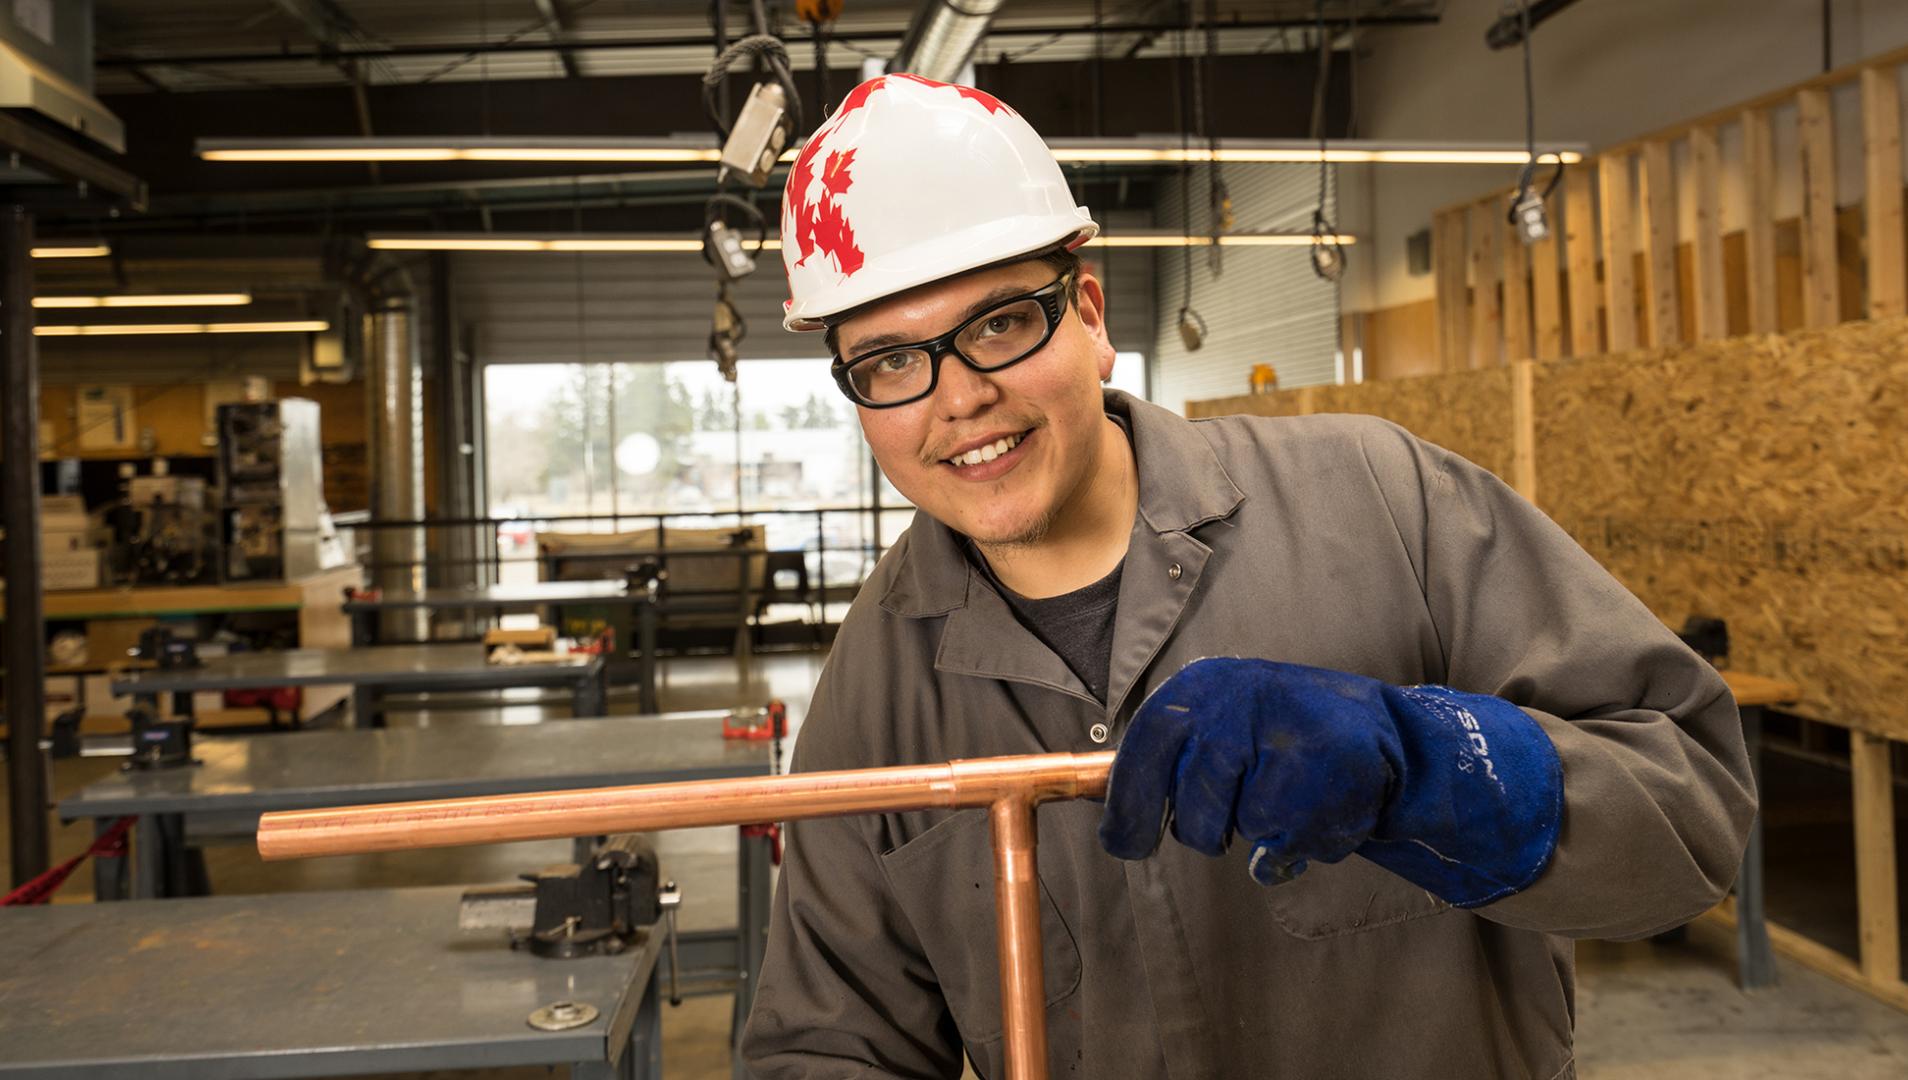 Piping Trades student holding a copper pipe